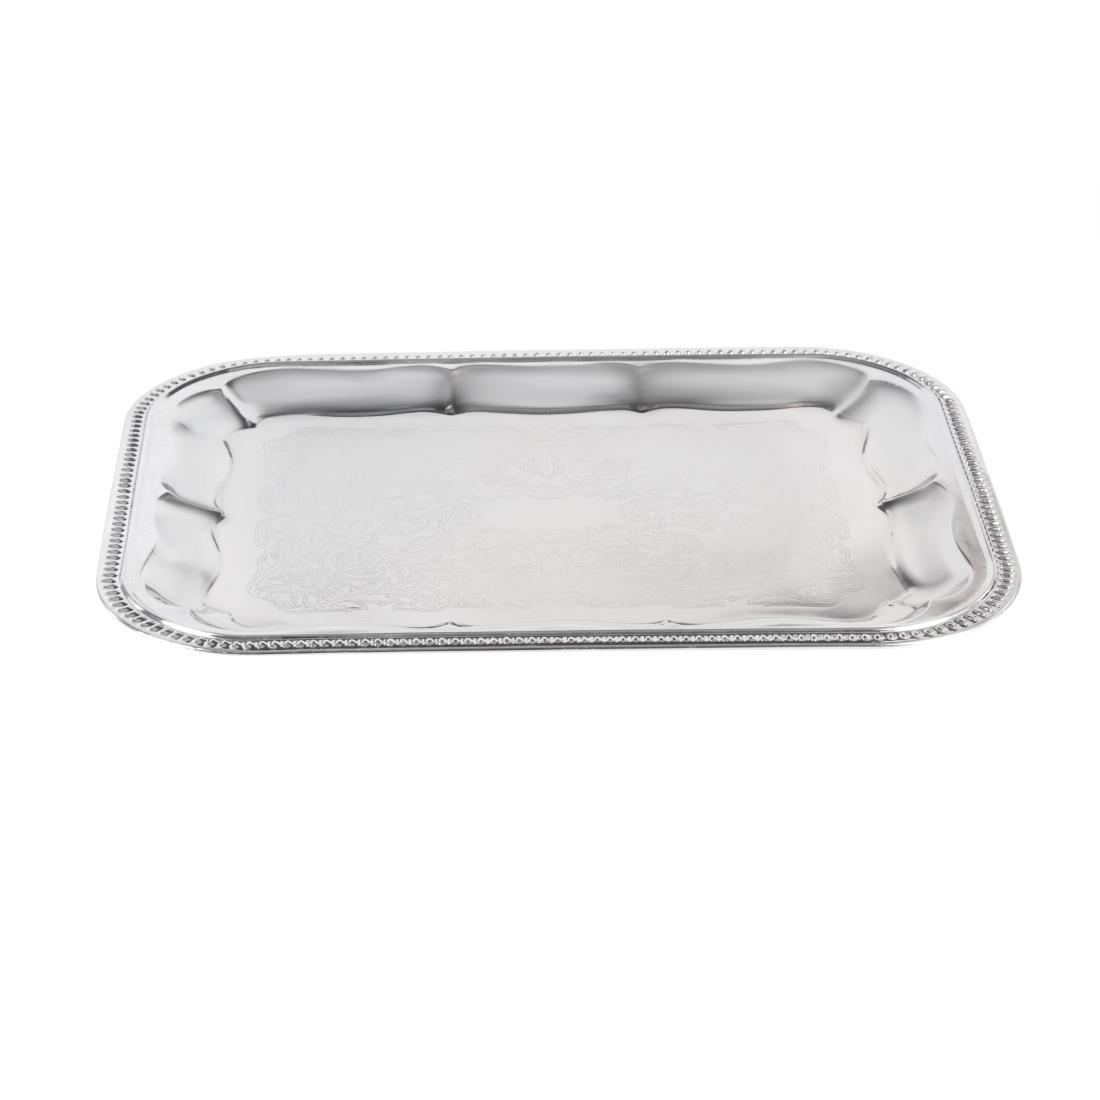 APS Semi-Disposable Party Tray 410 x 310mm Chrome - T751  - 3